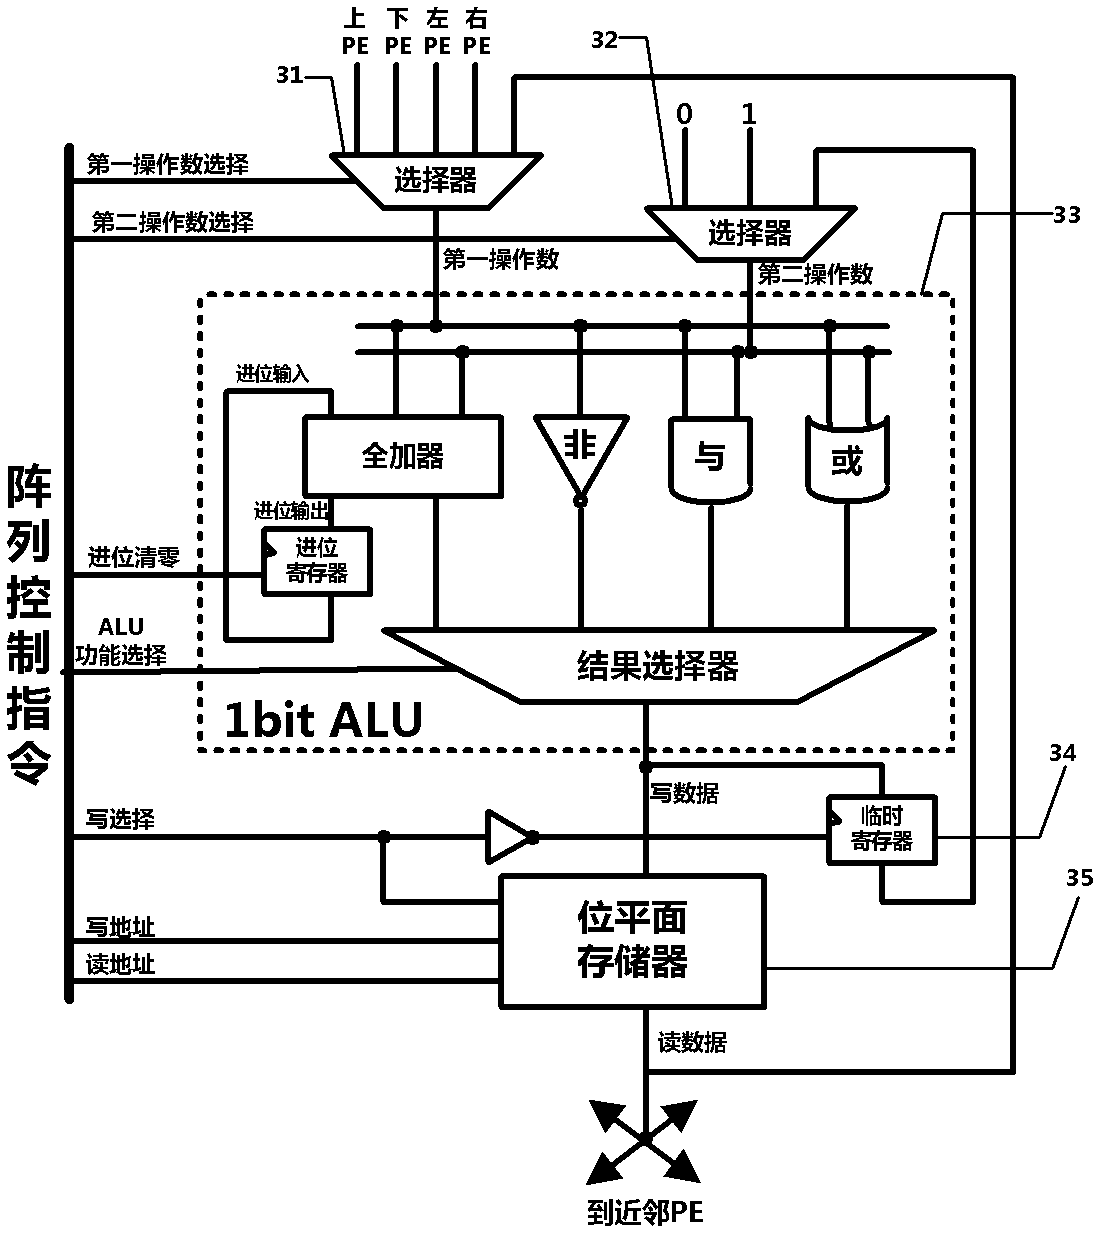 Programmable visual chip-based visual image processing system